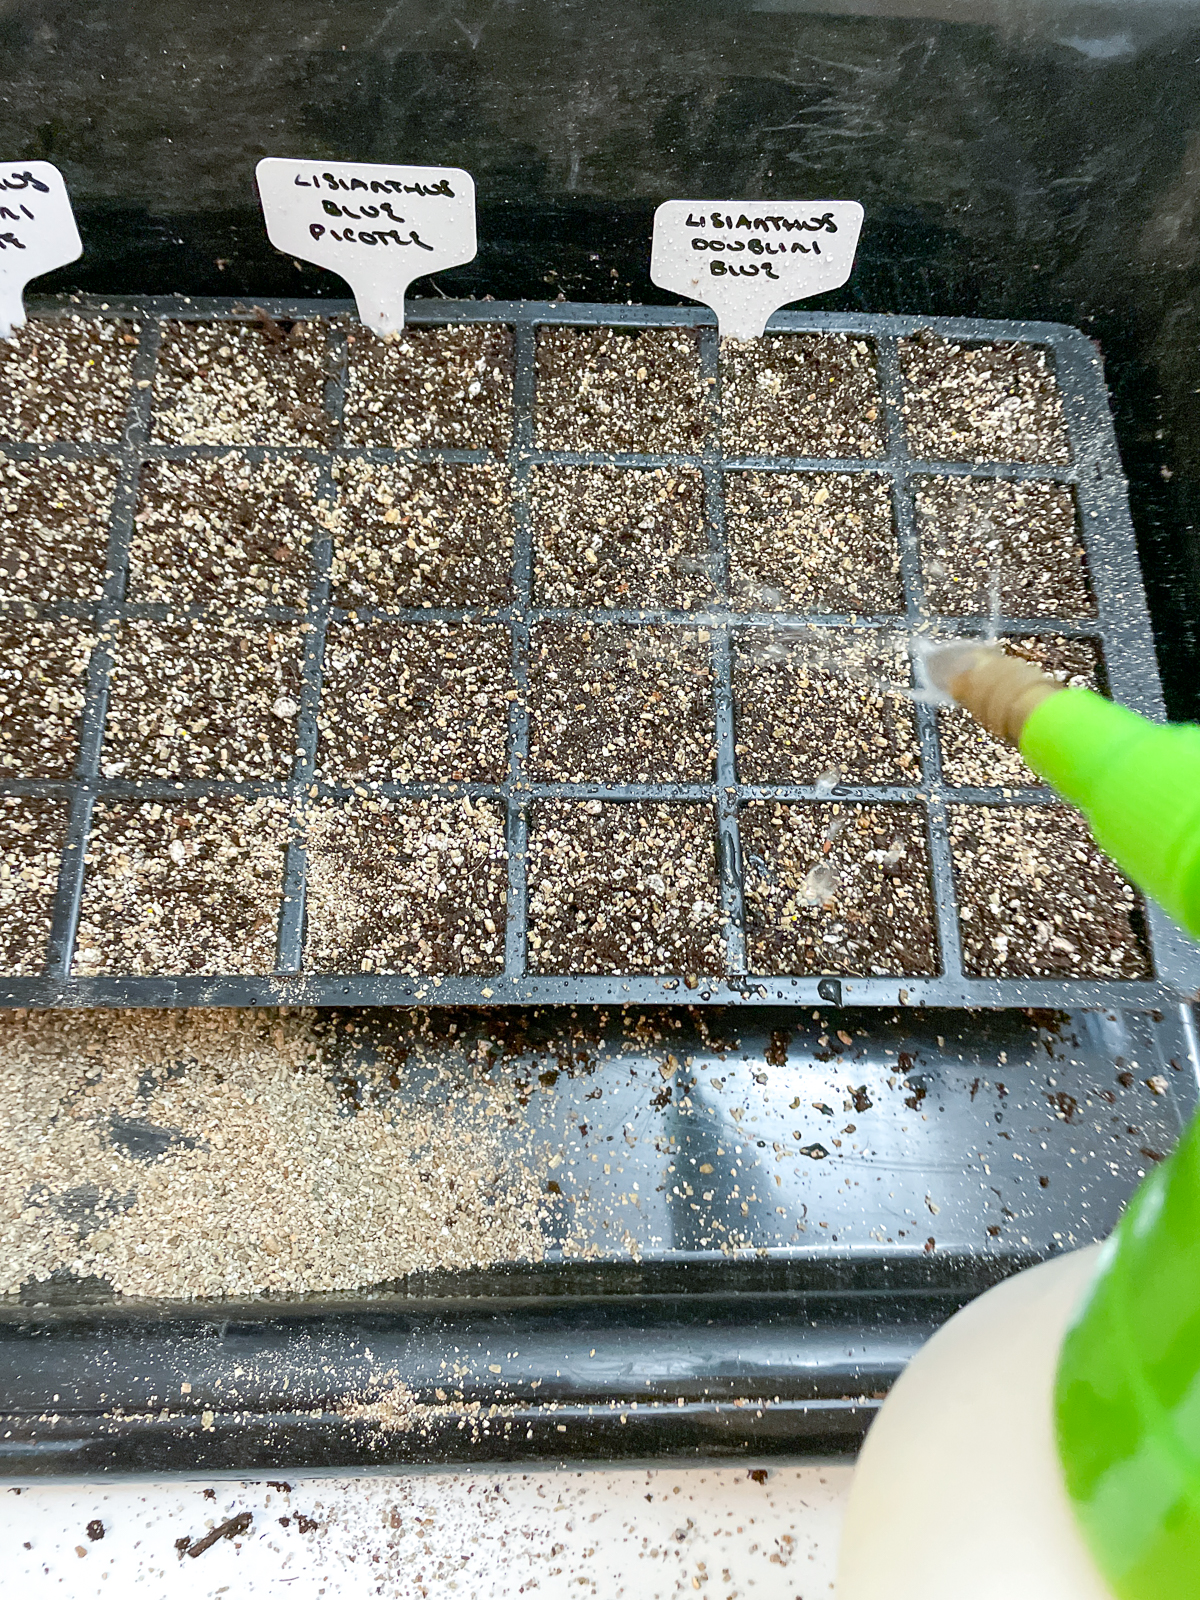 watering lisianthus seeds in a tray with a pump sprayer